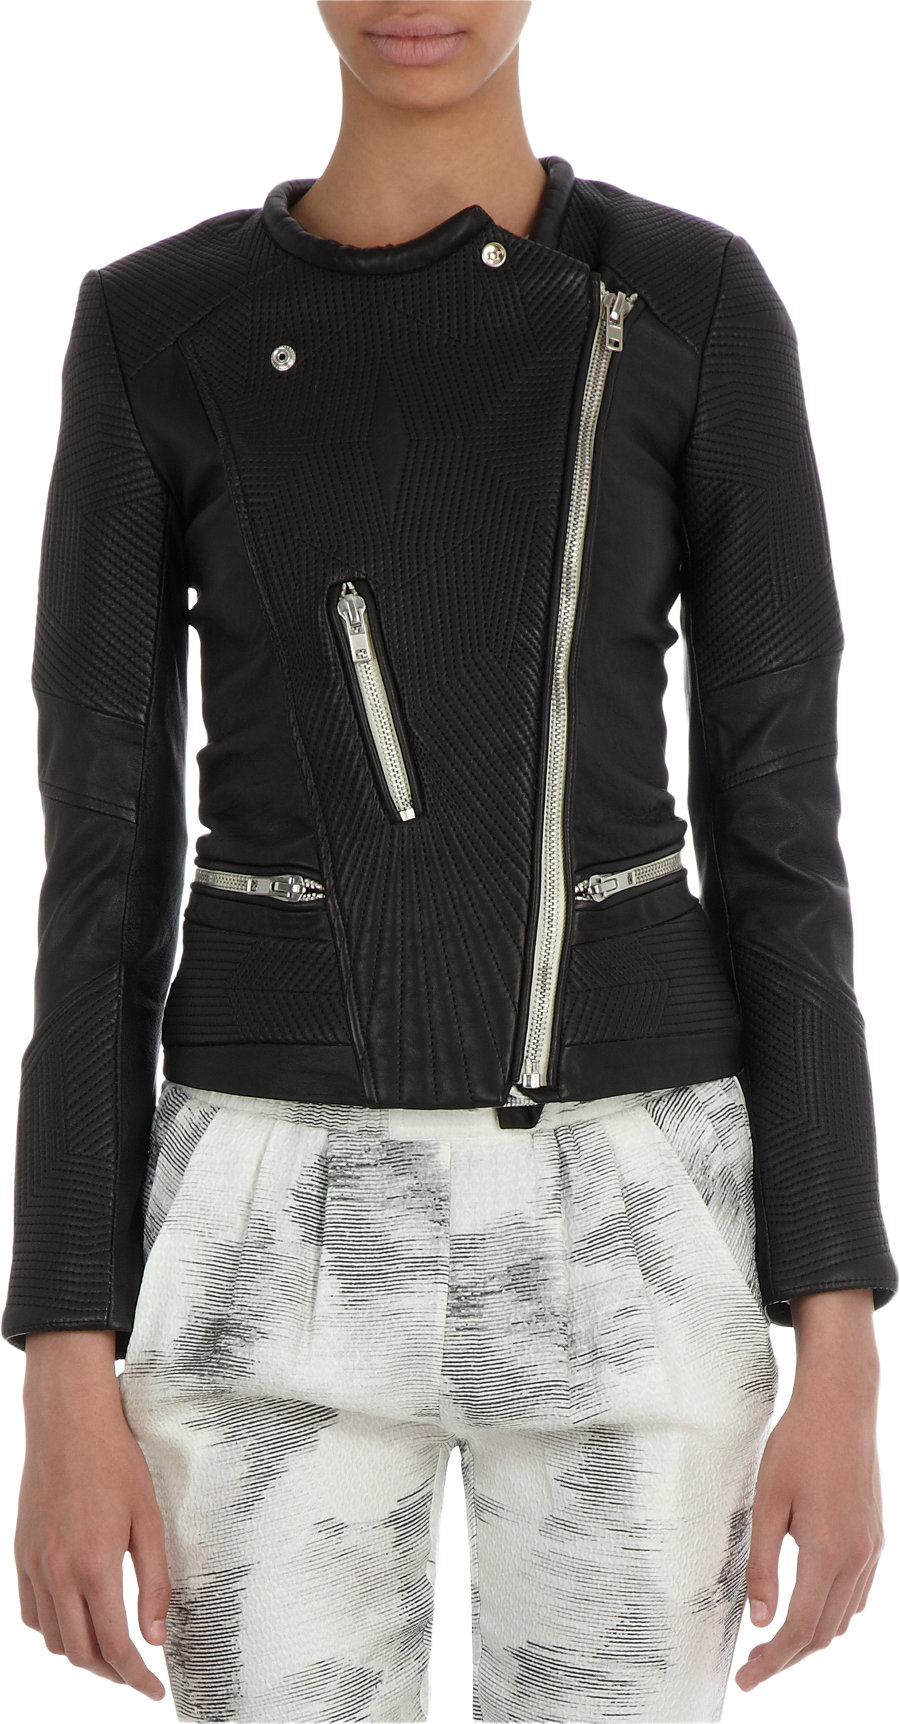 Lyst - Iro Quilted Leather Jacket in Black